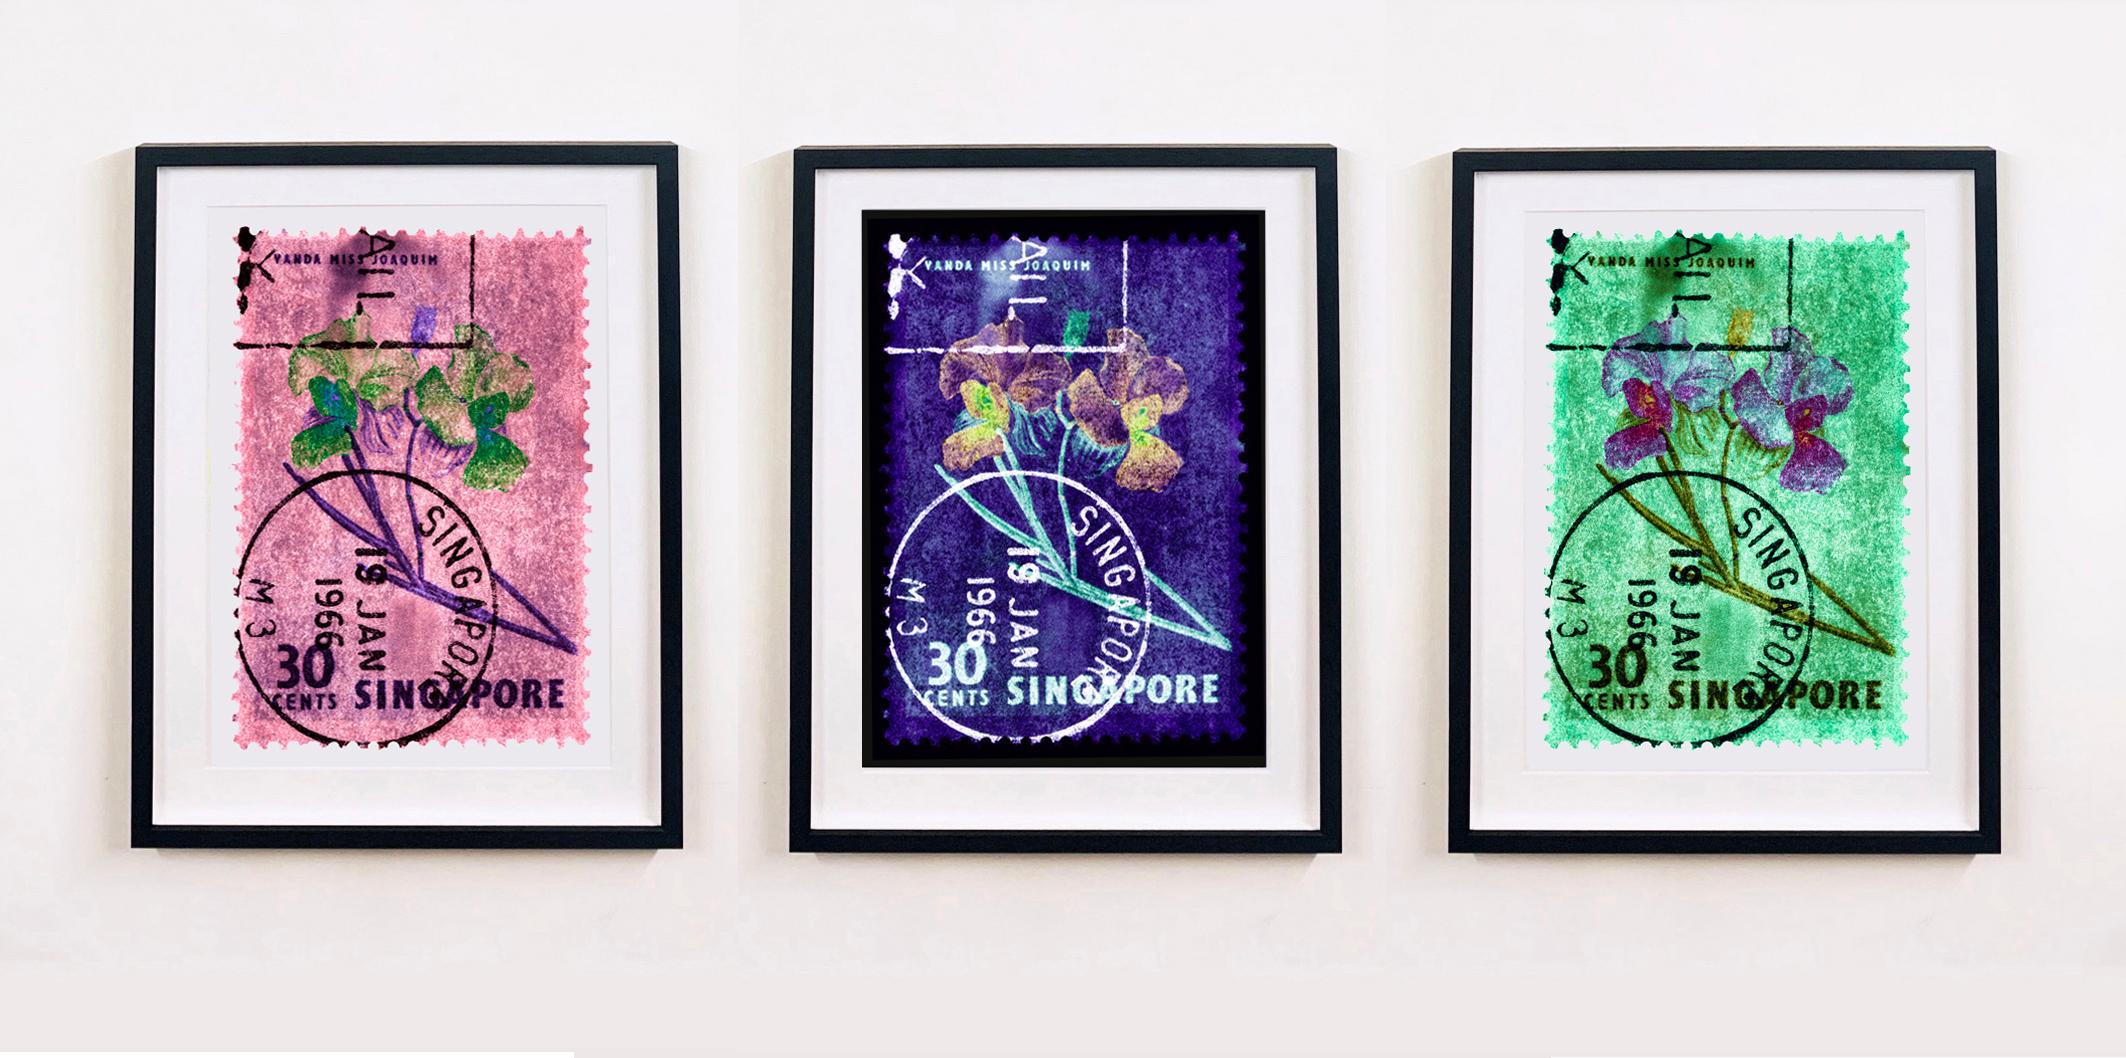 Singapore Stamp Collection, 30c Singapore Orchid Green - Floral color photo - Conceptual Photograph by Heidler & Heeps